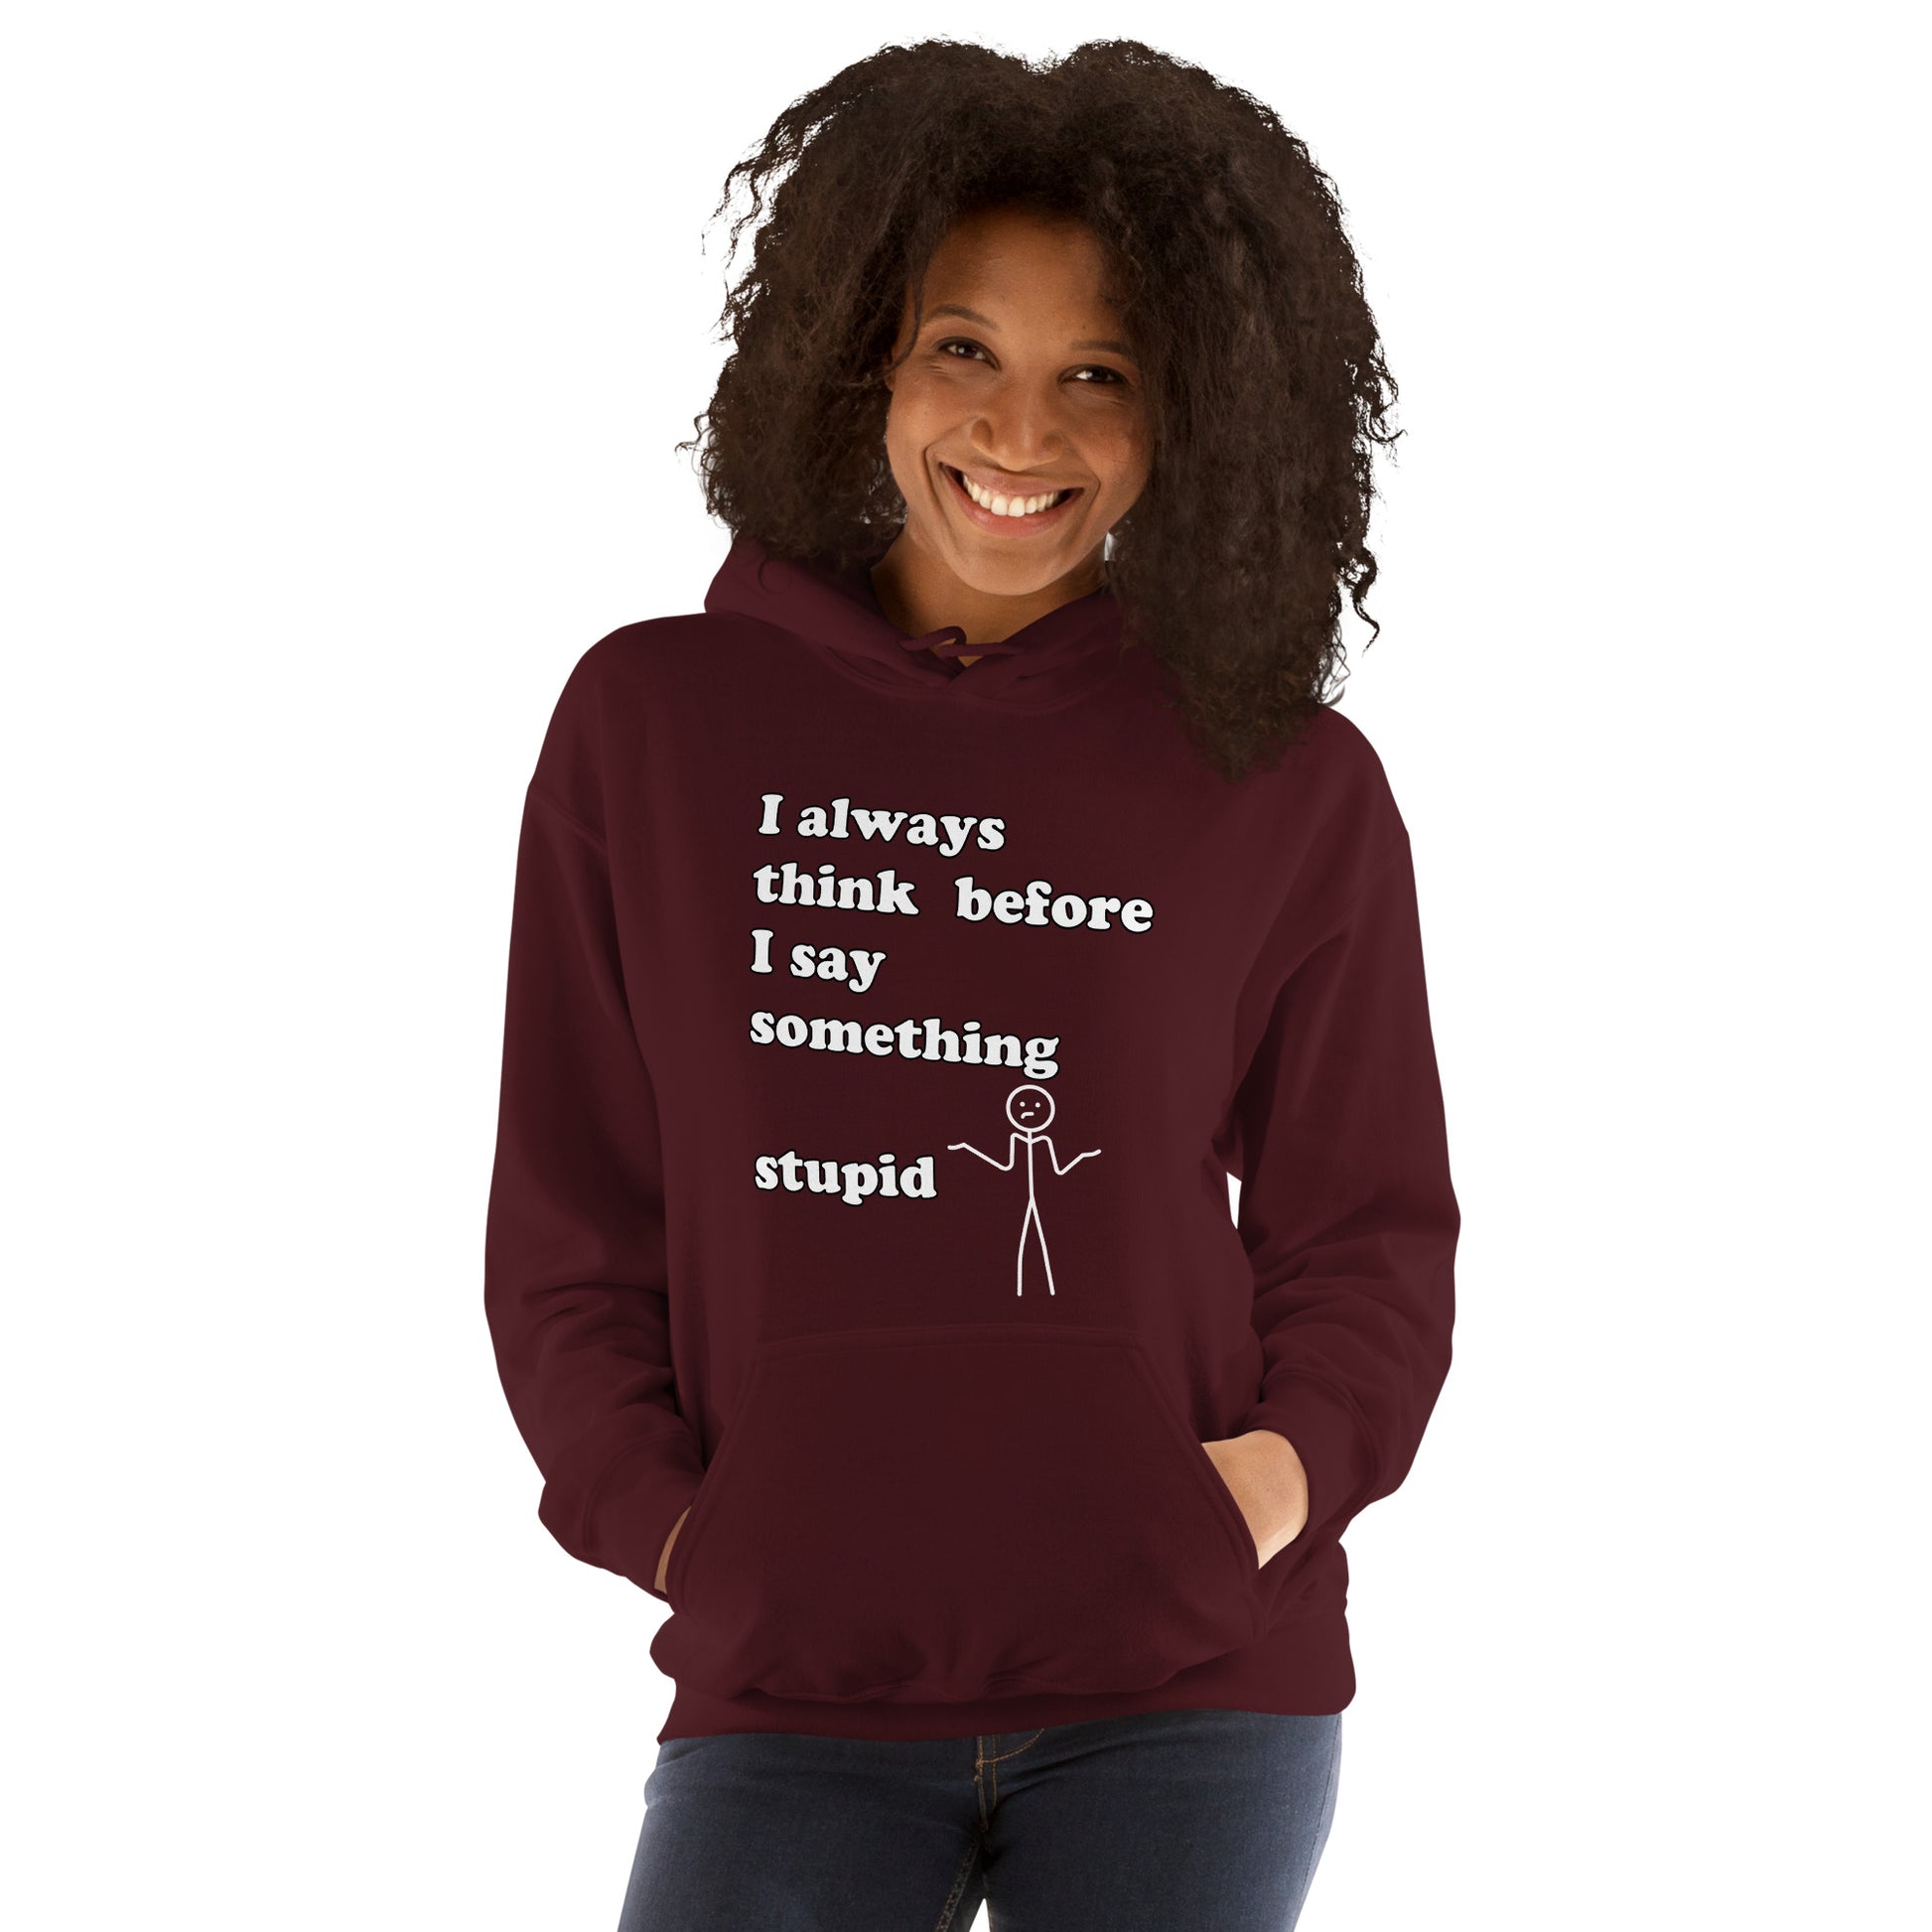 Woman with maroon hoodie with text "I always think before I say something stupid"